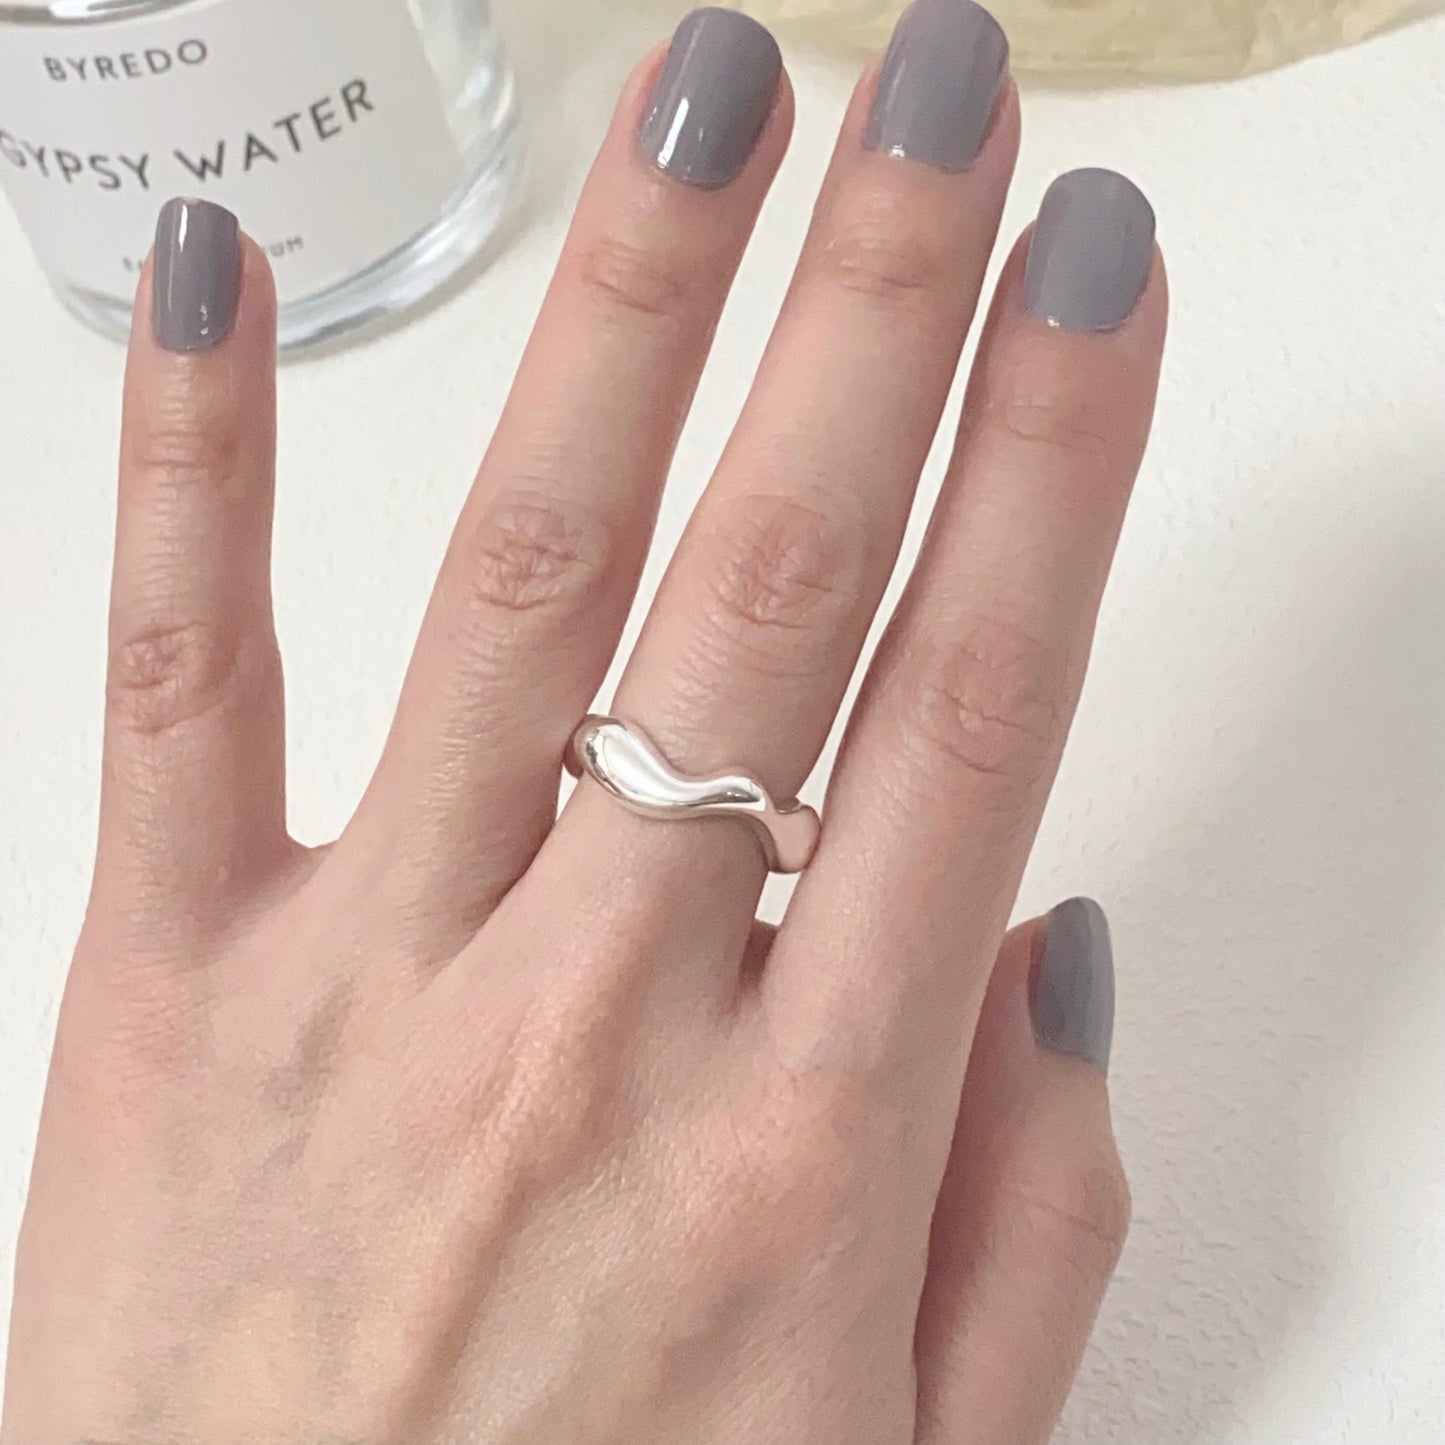 Quirky Essence Ring